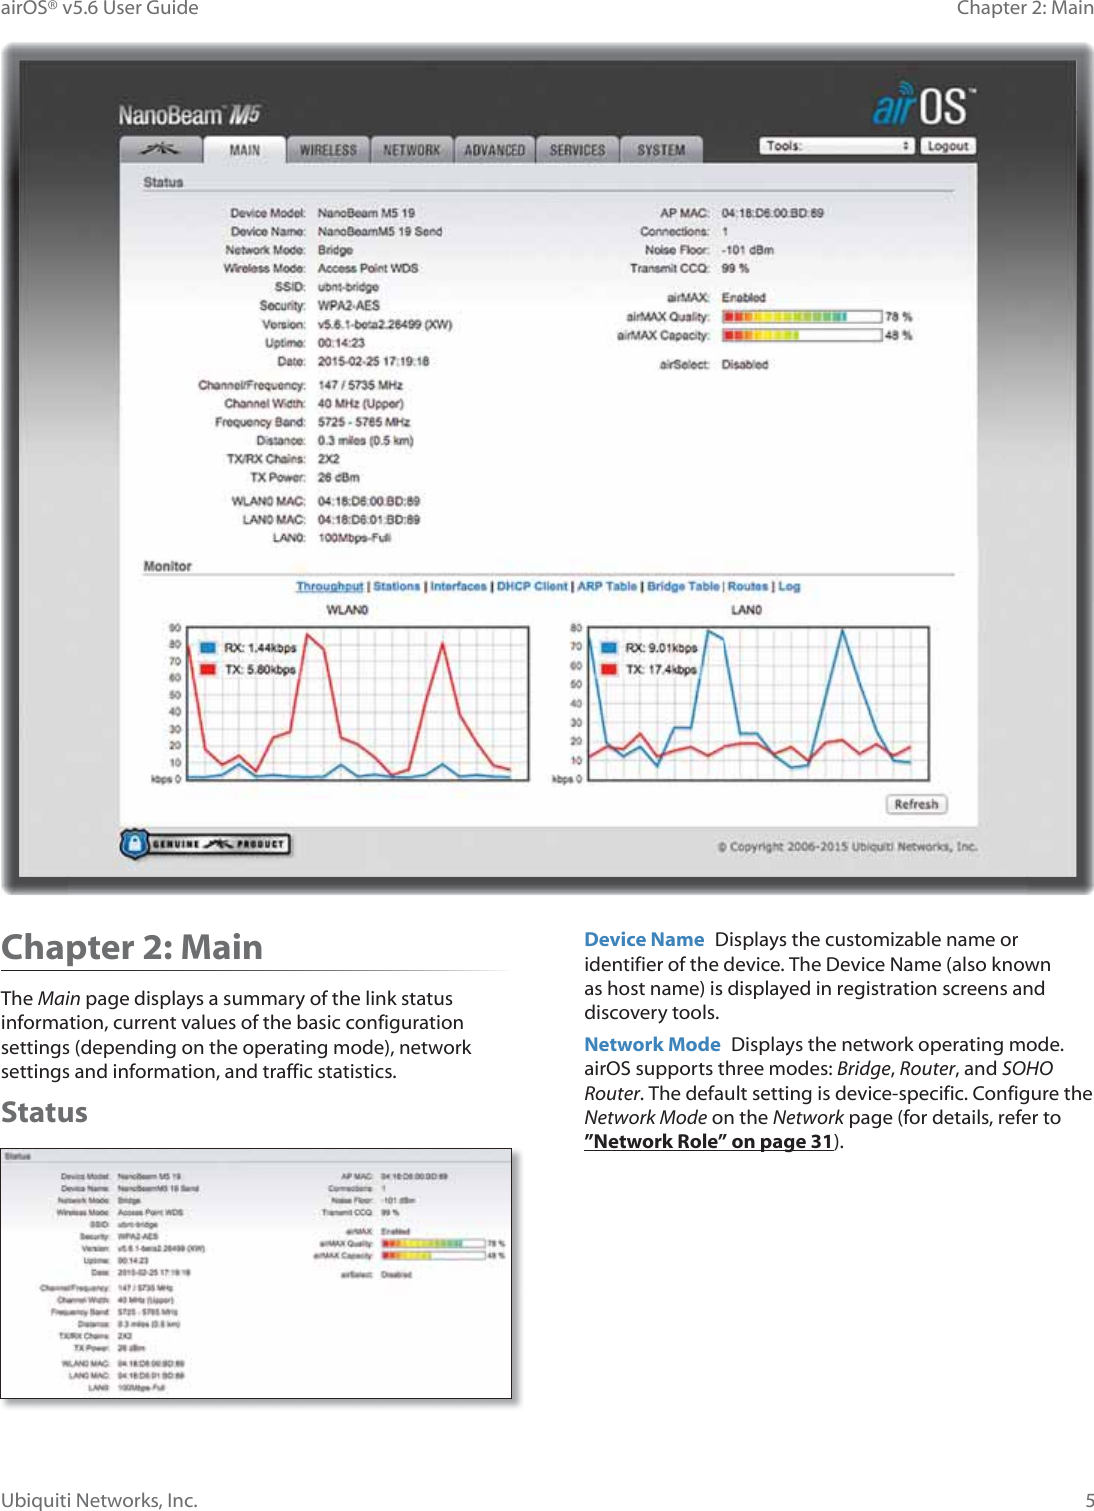 5Chapter 2: MainairOS® v5.6 User GuideUbiquiti Networks, Inc.Chapter 2: MainThe Main page displays a summary of the link status information, current values of the basic configuration settings (depending on the operating mode), network settings and information, and traffic statistics.StatusDevice Name  Displays the customizable name or identifier of the device. The Device Name (also known as host name) is displayed in registration screens and discovery tools.Network Mode  Displays the network operating mode. airOS supports three modes: Bridge, Router, and SOHO Router. The default setting is device-specific. Configure the Network Mode on the Network page (for details, refer to ”Network Role” on page 31).